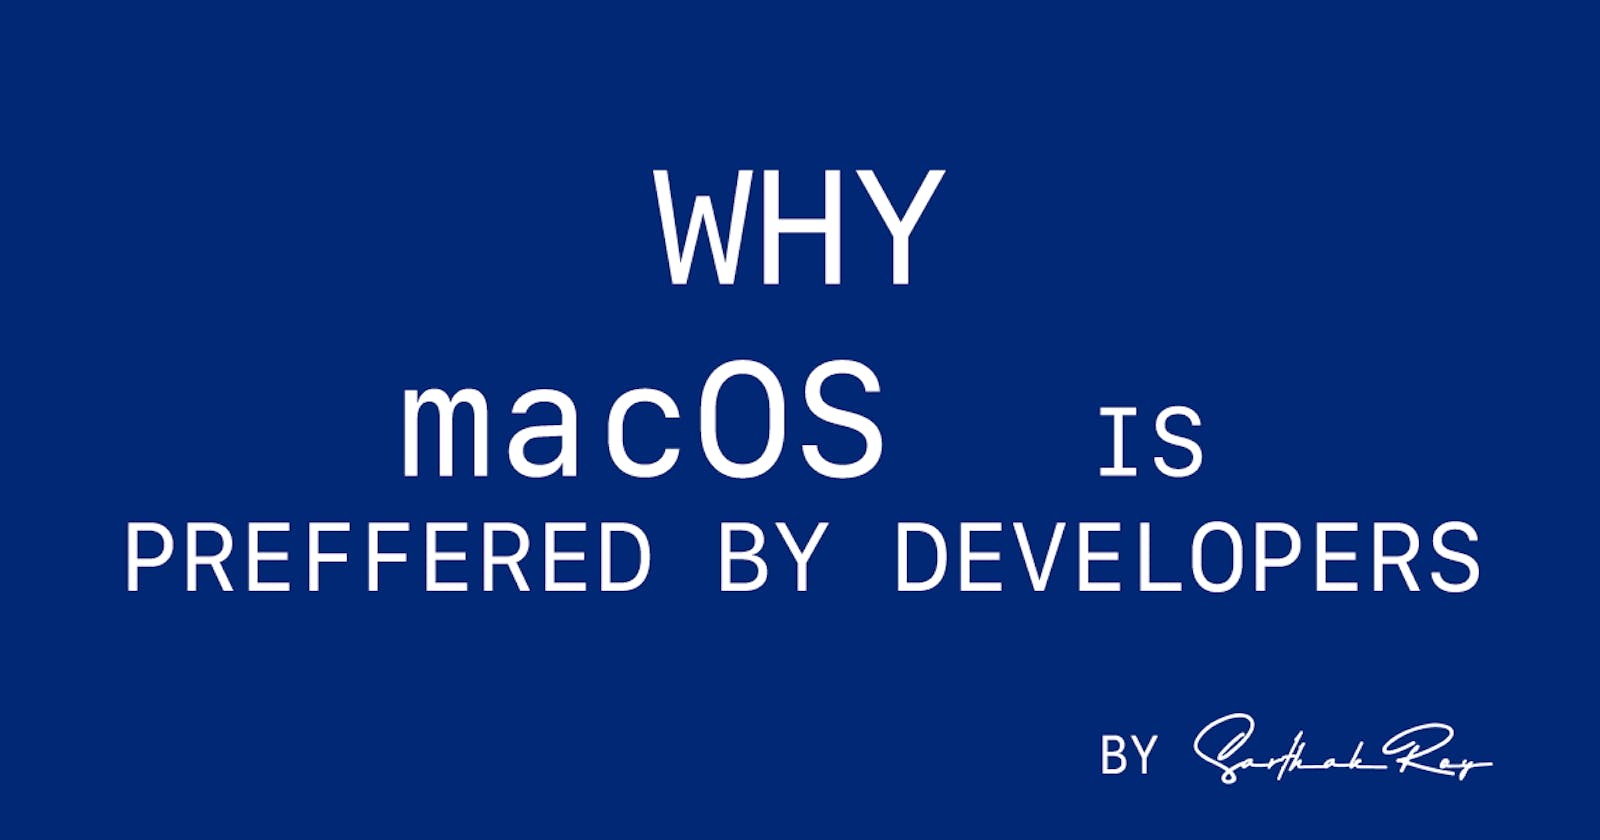 Why is Apple macOS preferred by Developers